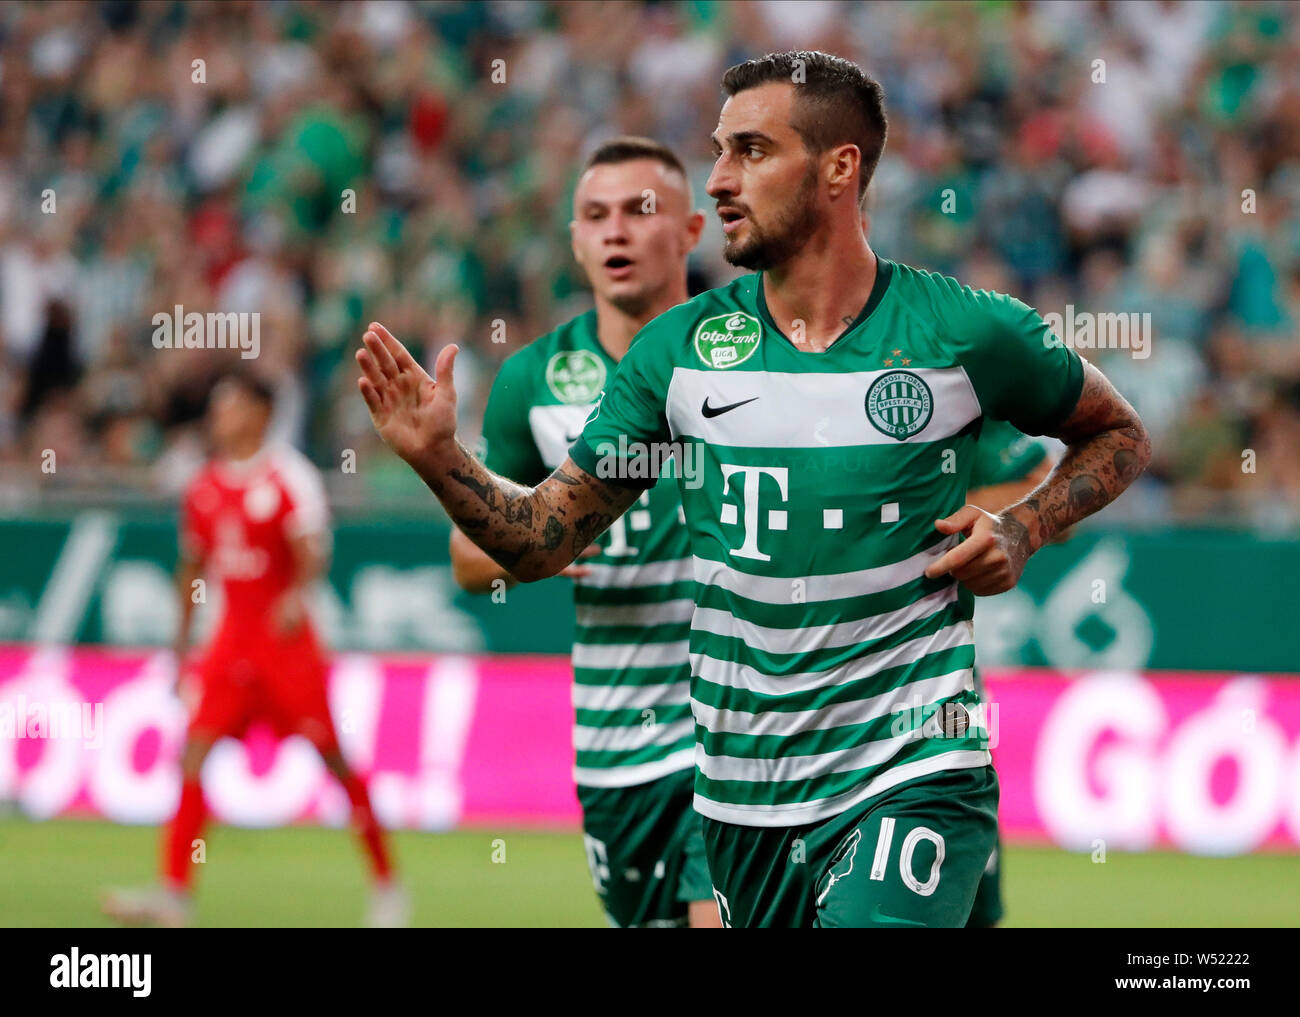 BUDAPEST, HUNGARY - JULY 24: Davide Lanzafame of Ferencvarosi TC celebrates  his goal during the UEFA Champions League Qualifying Round match between  Ferencvarosi TC and Valletta FC at Ferencvaros Stadium on July